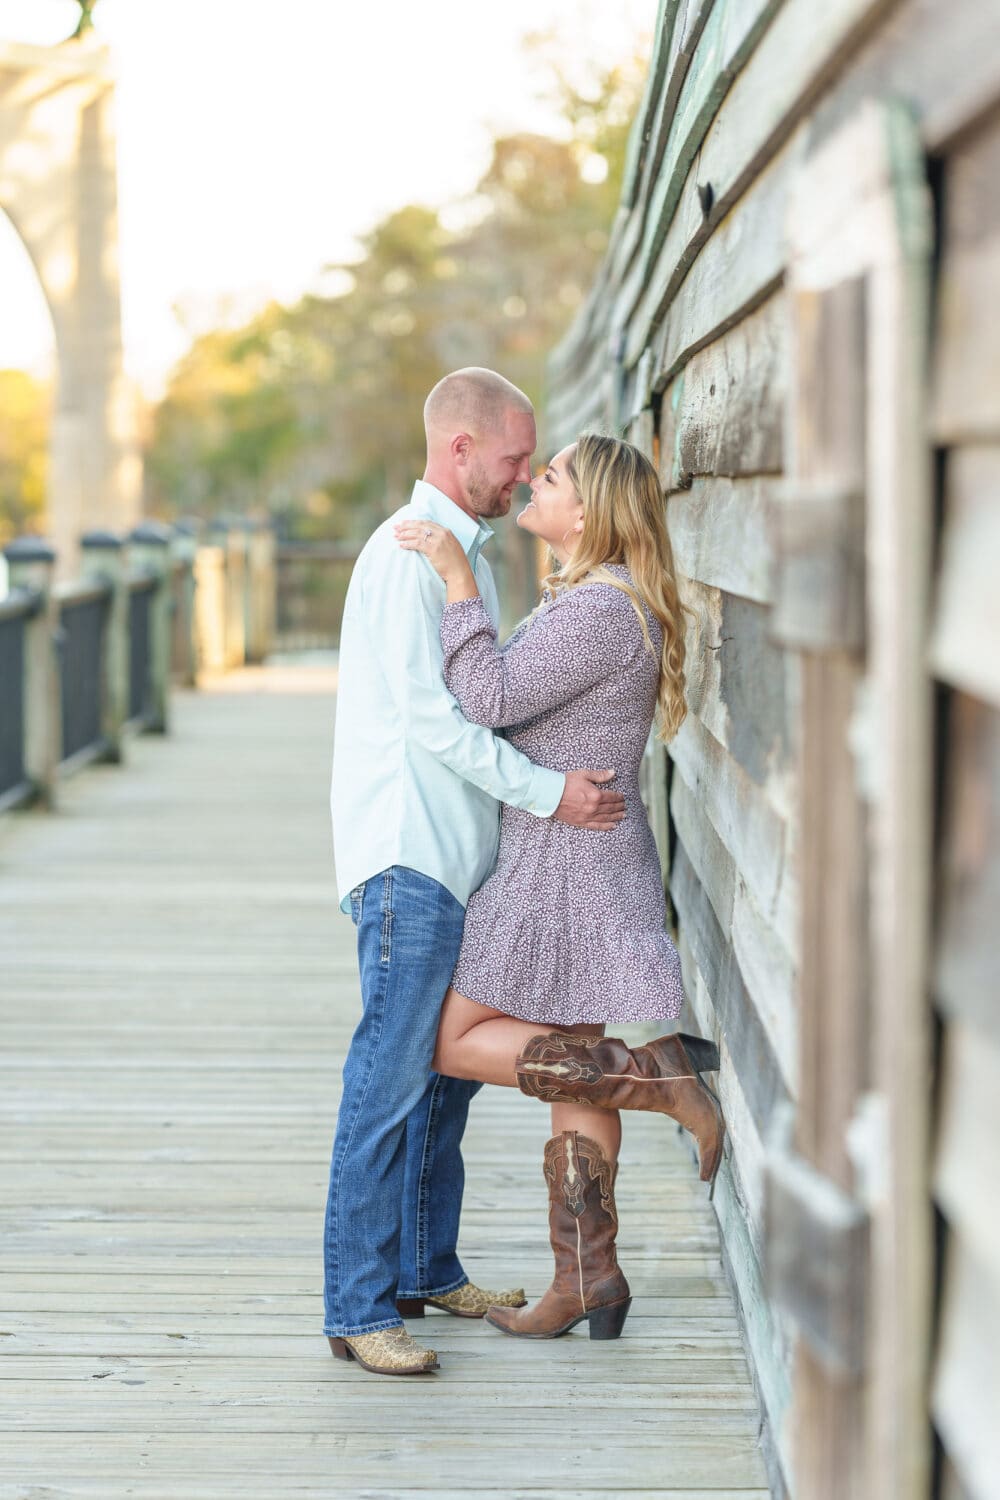 Engagement portraits for my friends from Crossfit with cowboy boots by the Waccamaw River - Conway River Walk